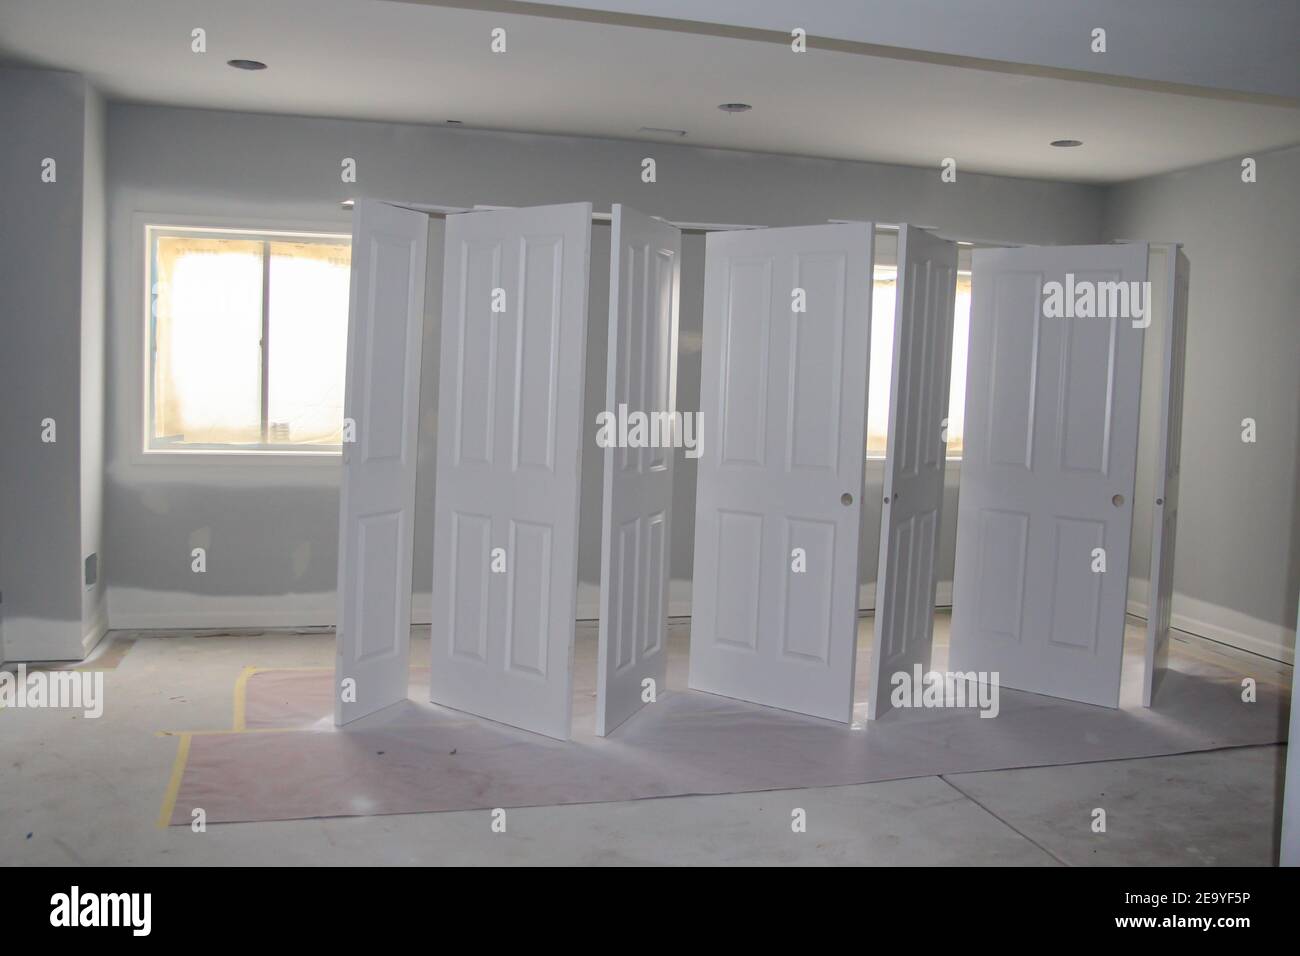 White painted four panel doors spray painted with airless sprayer in the basement with light coming in the windows. Stock Photo